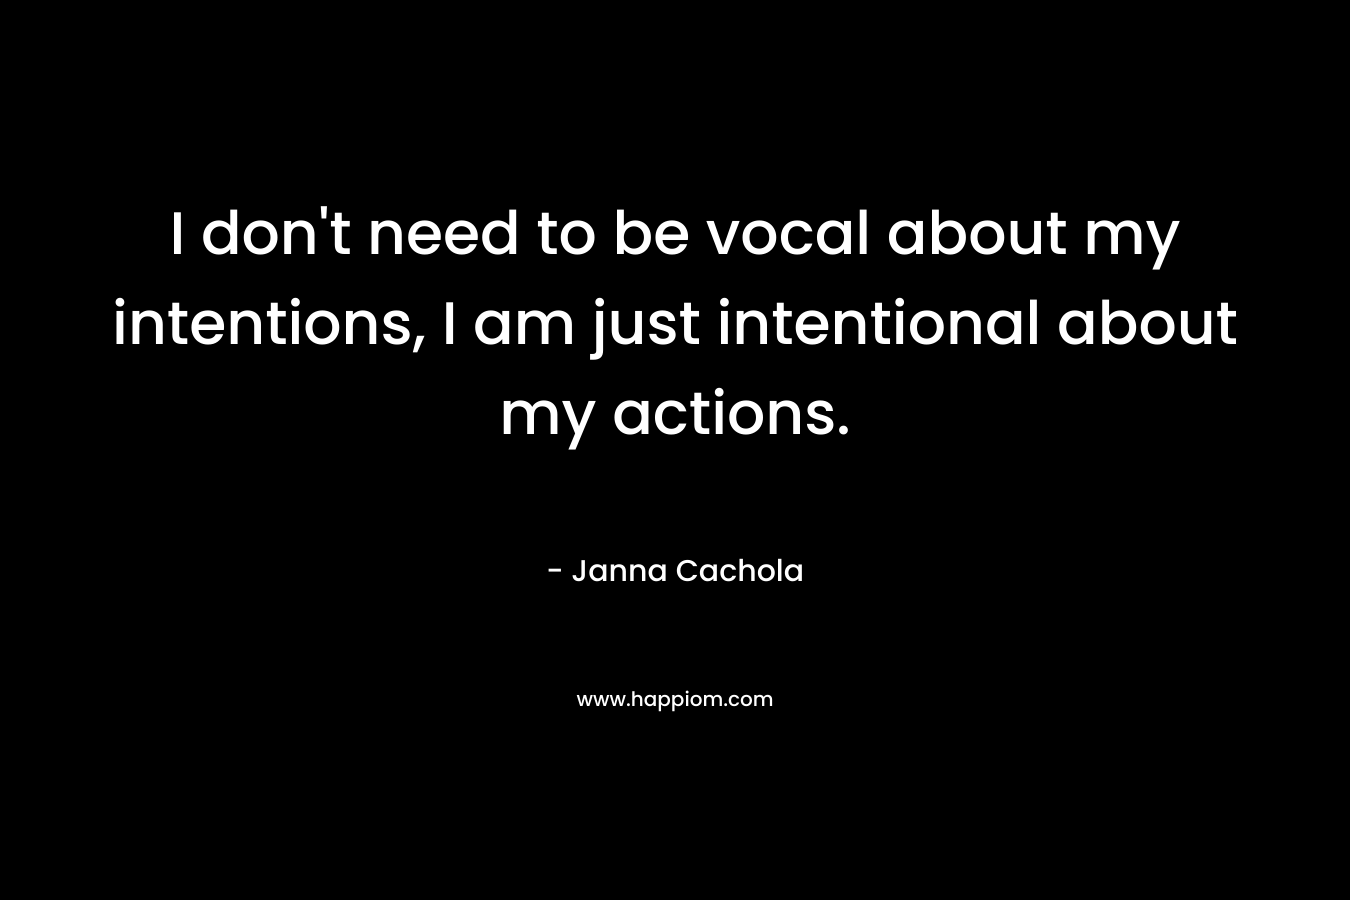 I don't need to be vocal about my intentions, I am just intentional about my actions.